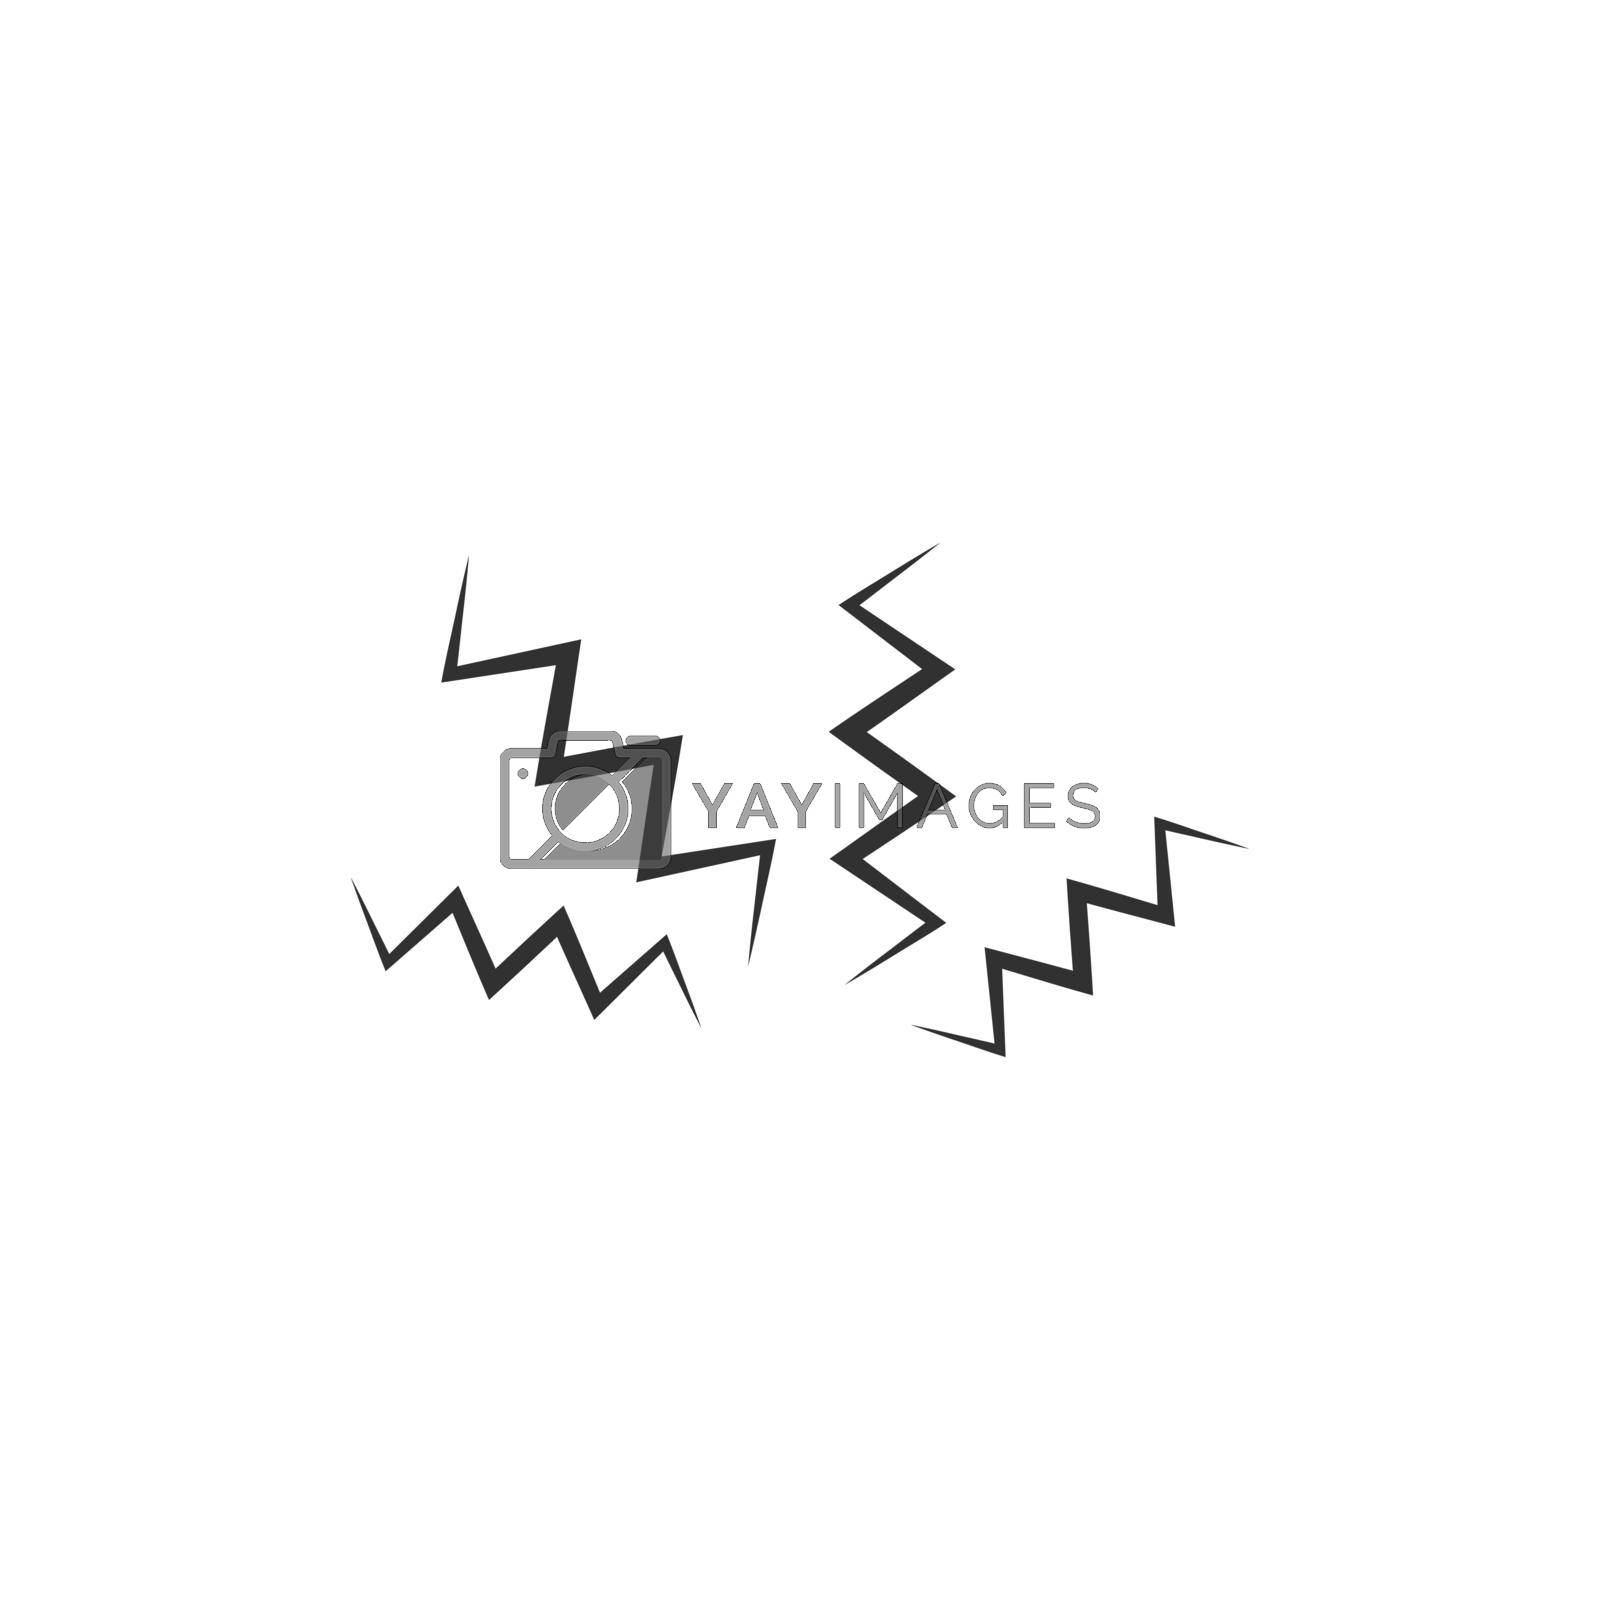 Royalty free image of Electricity shock lightning. Speed flashing lightnings bolt, shock lightning arrow symbols. Stock Vector illustration isolated on white background. by Kyrylov